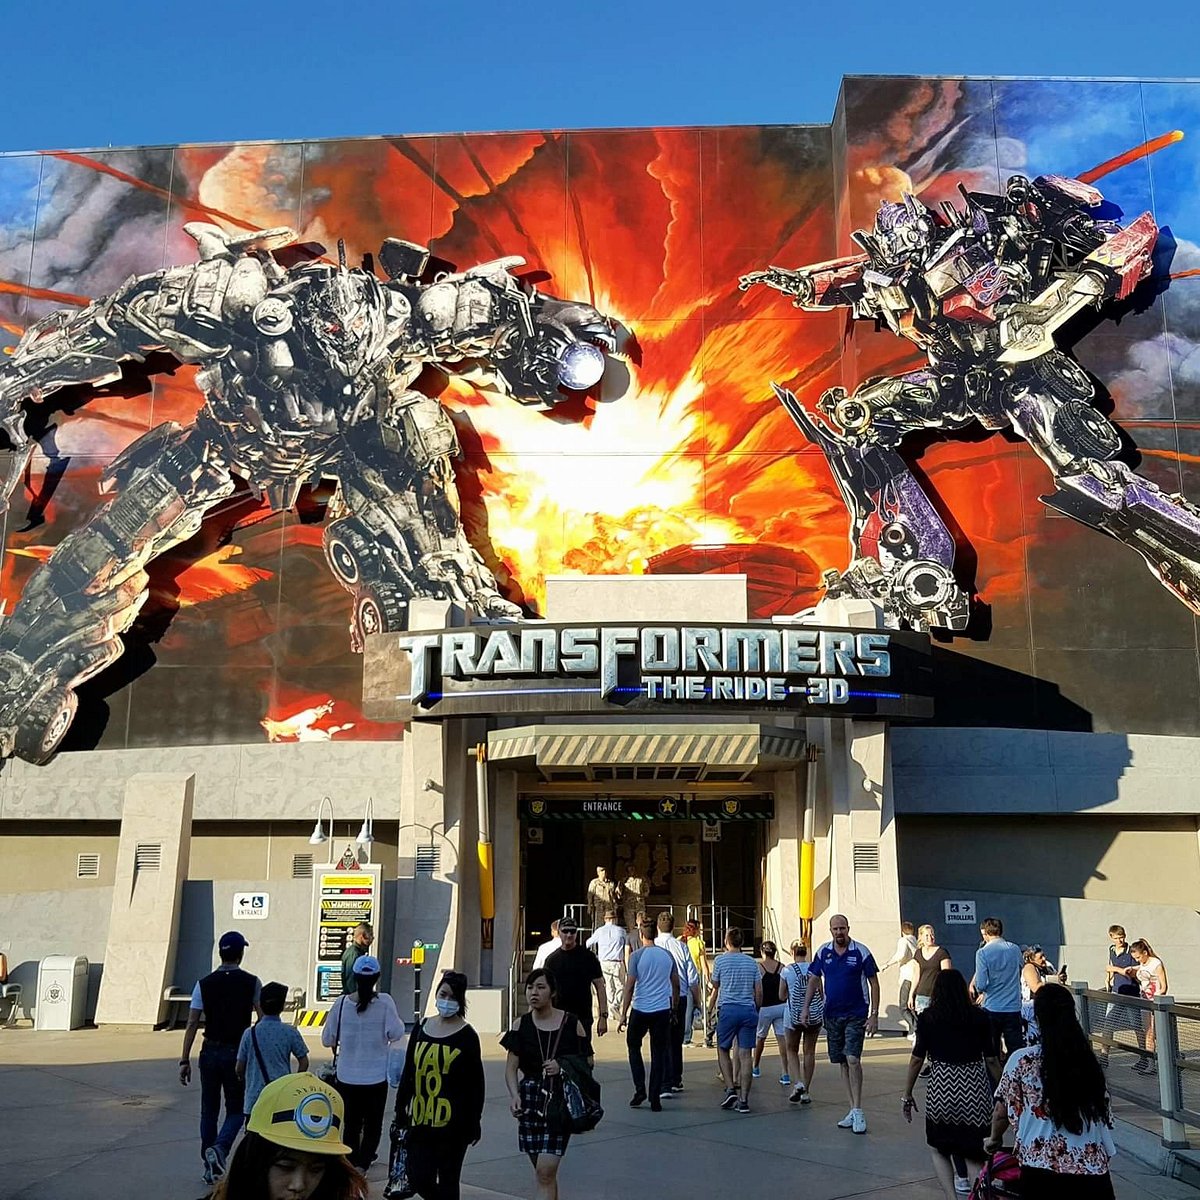 The Transformers universal studios hollywood